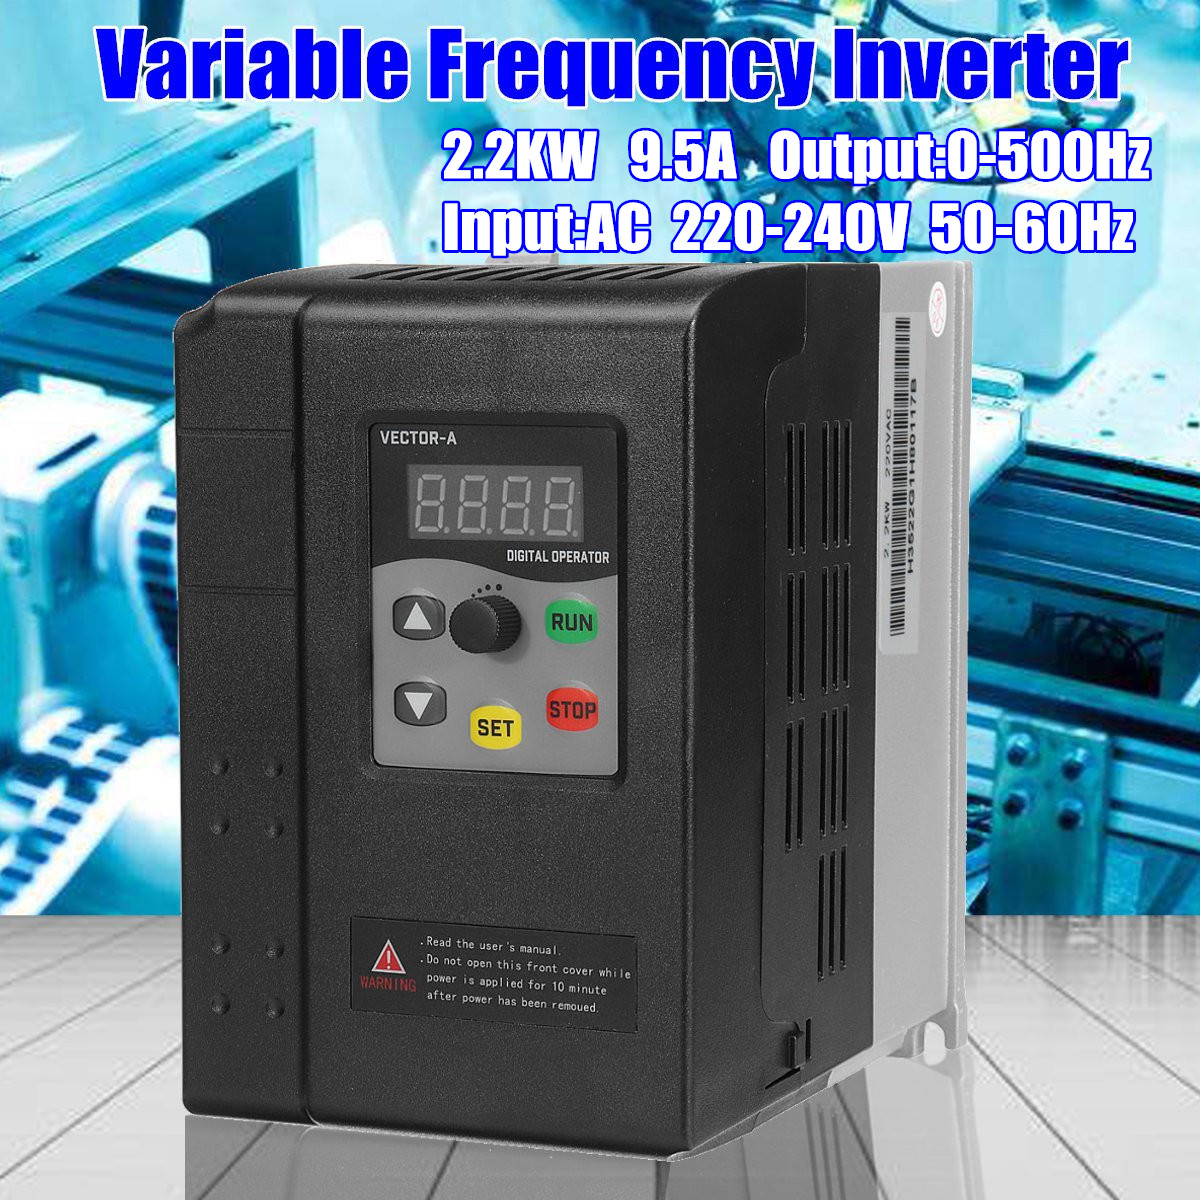 22KW-220V-95A-1HP-To-3-Phase-Variable-Frequency-Inverter-Motor-Drive-VSD-VFD-1392464-2